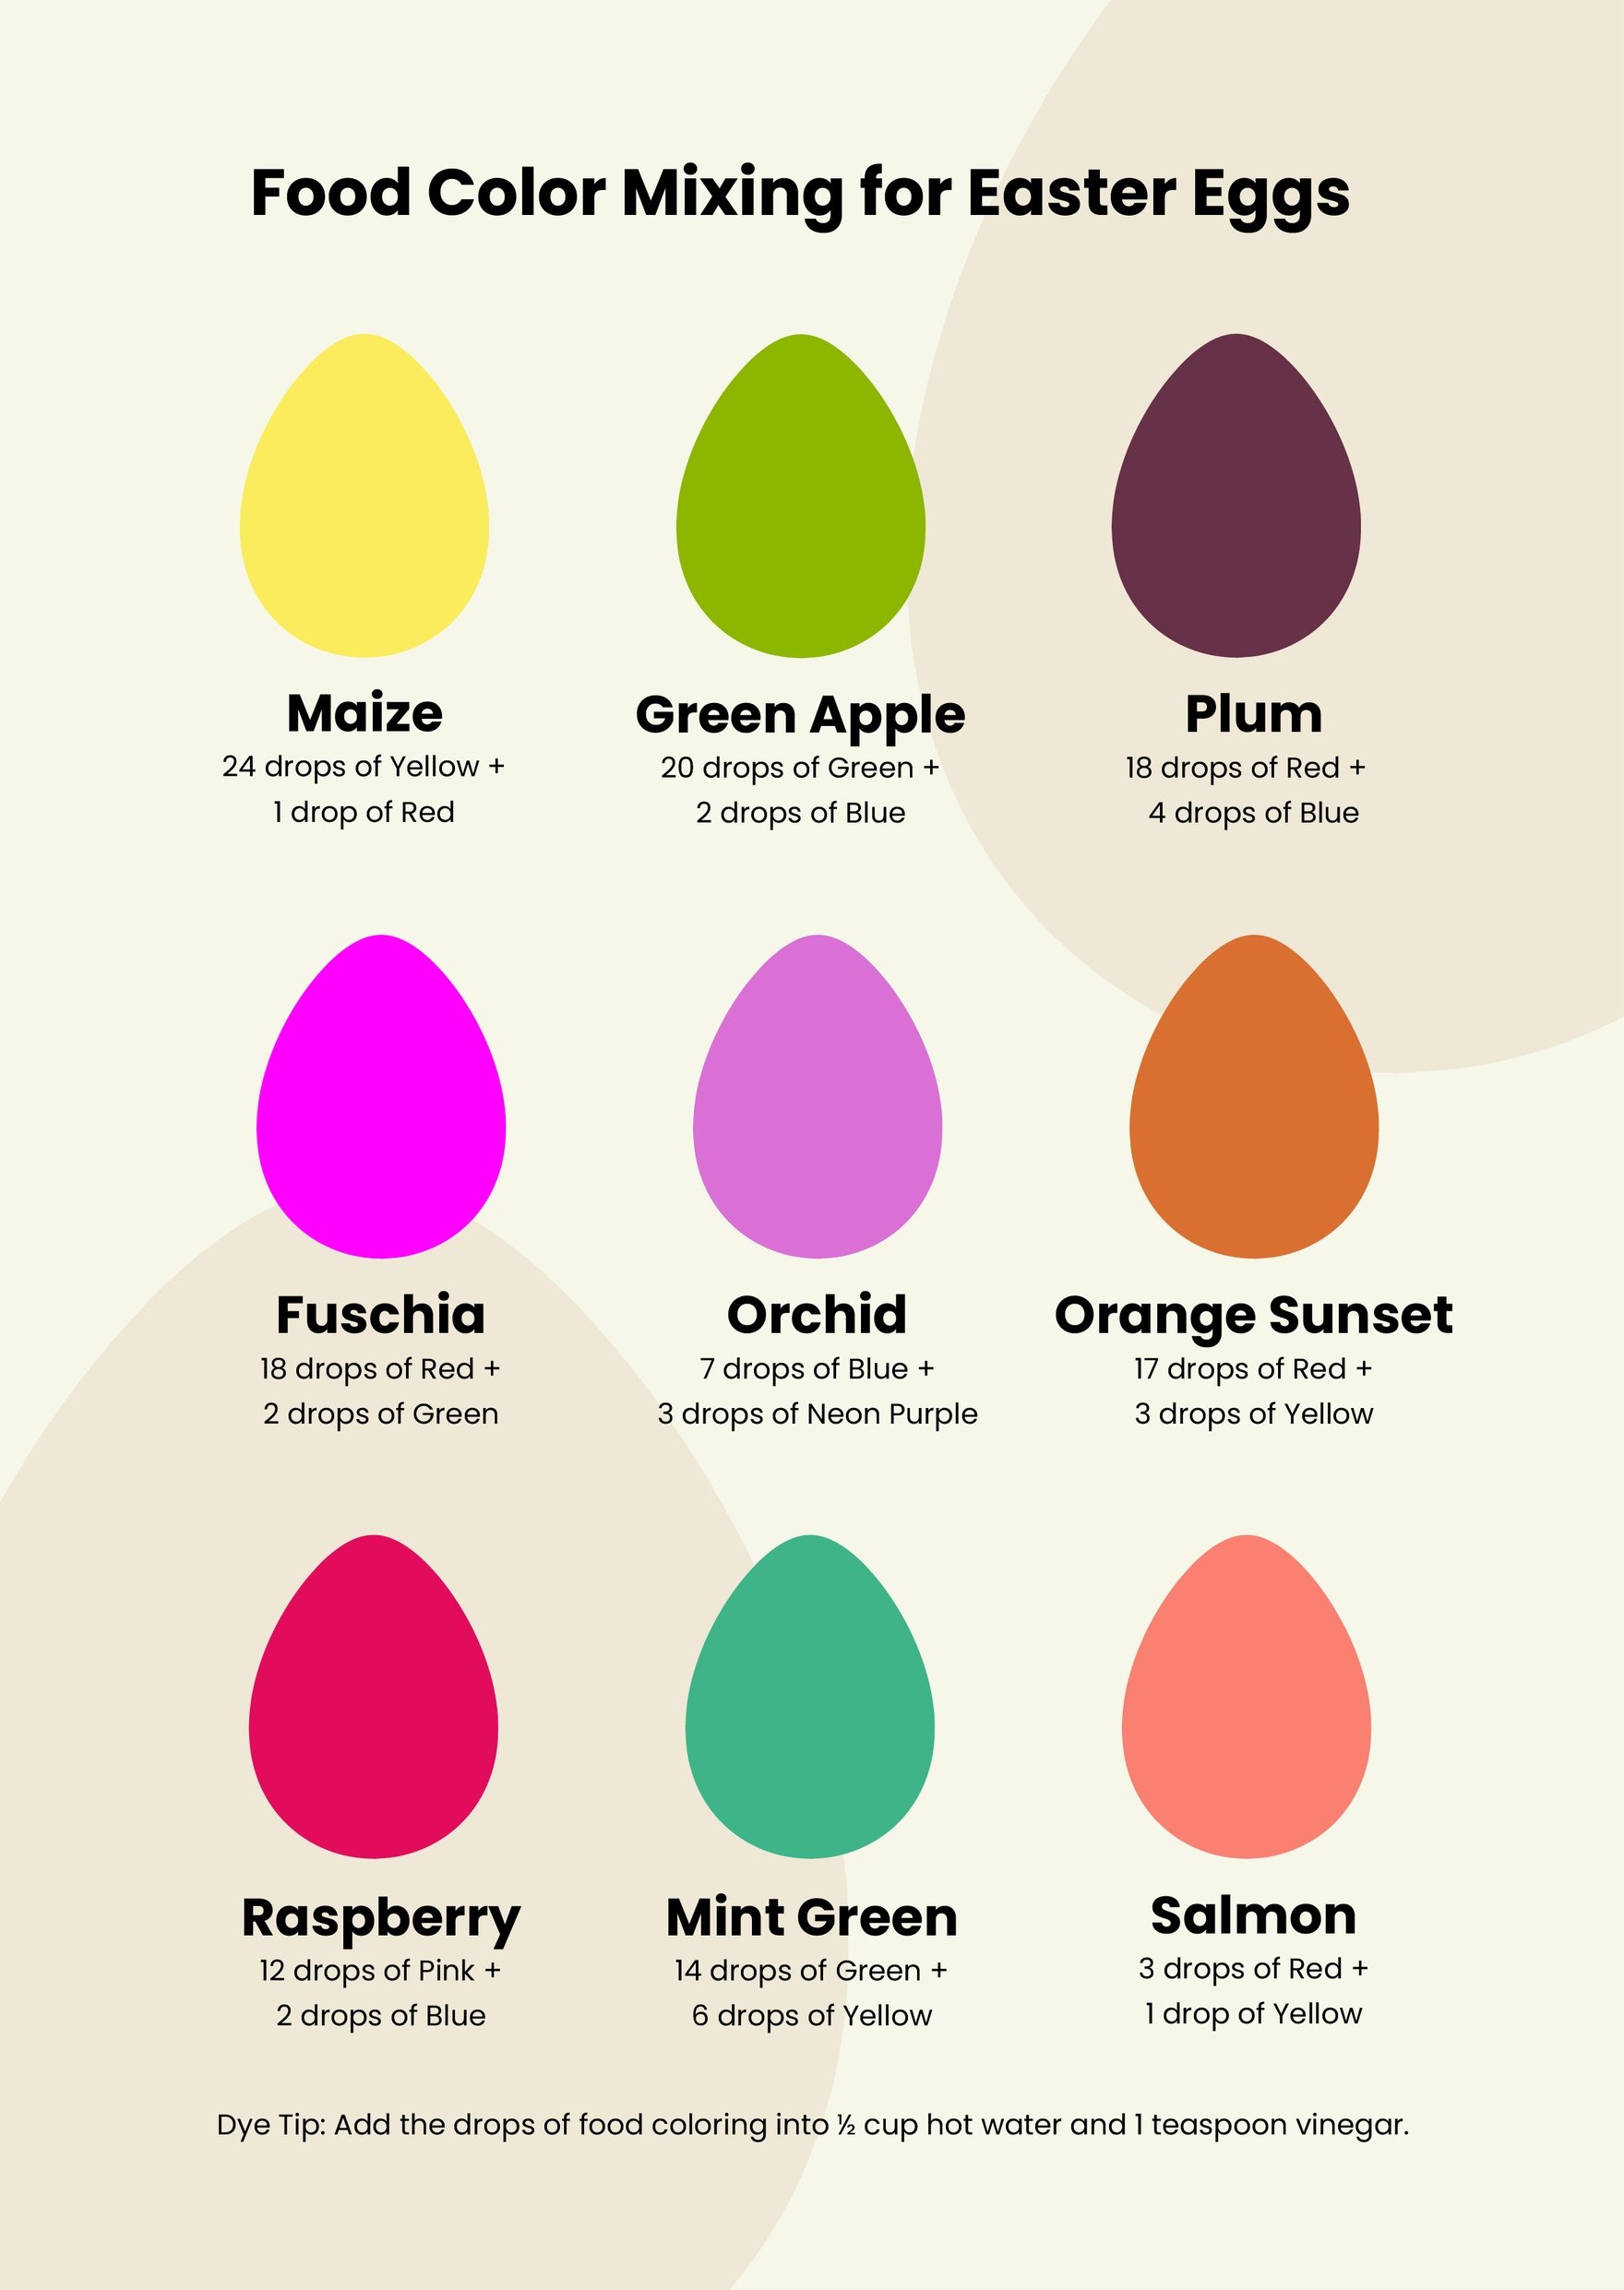 Free Food Coloring Chart For Eggs - Download in PDF, Illustrator